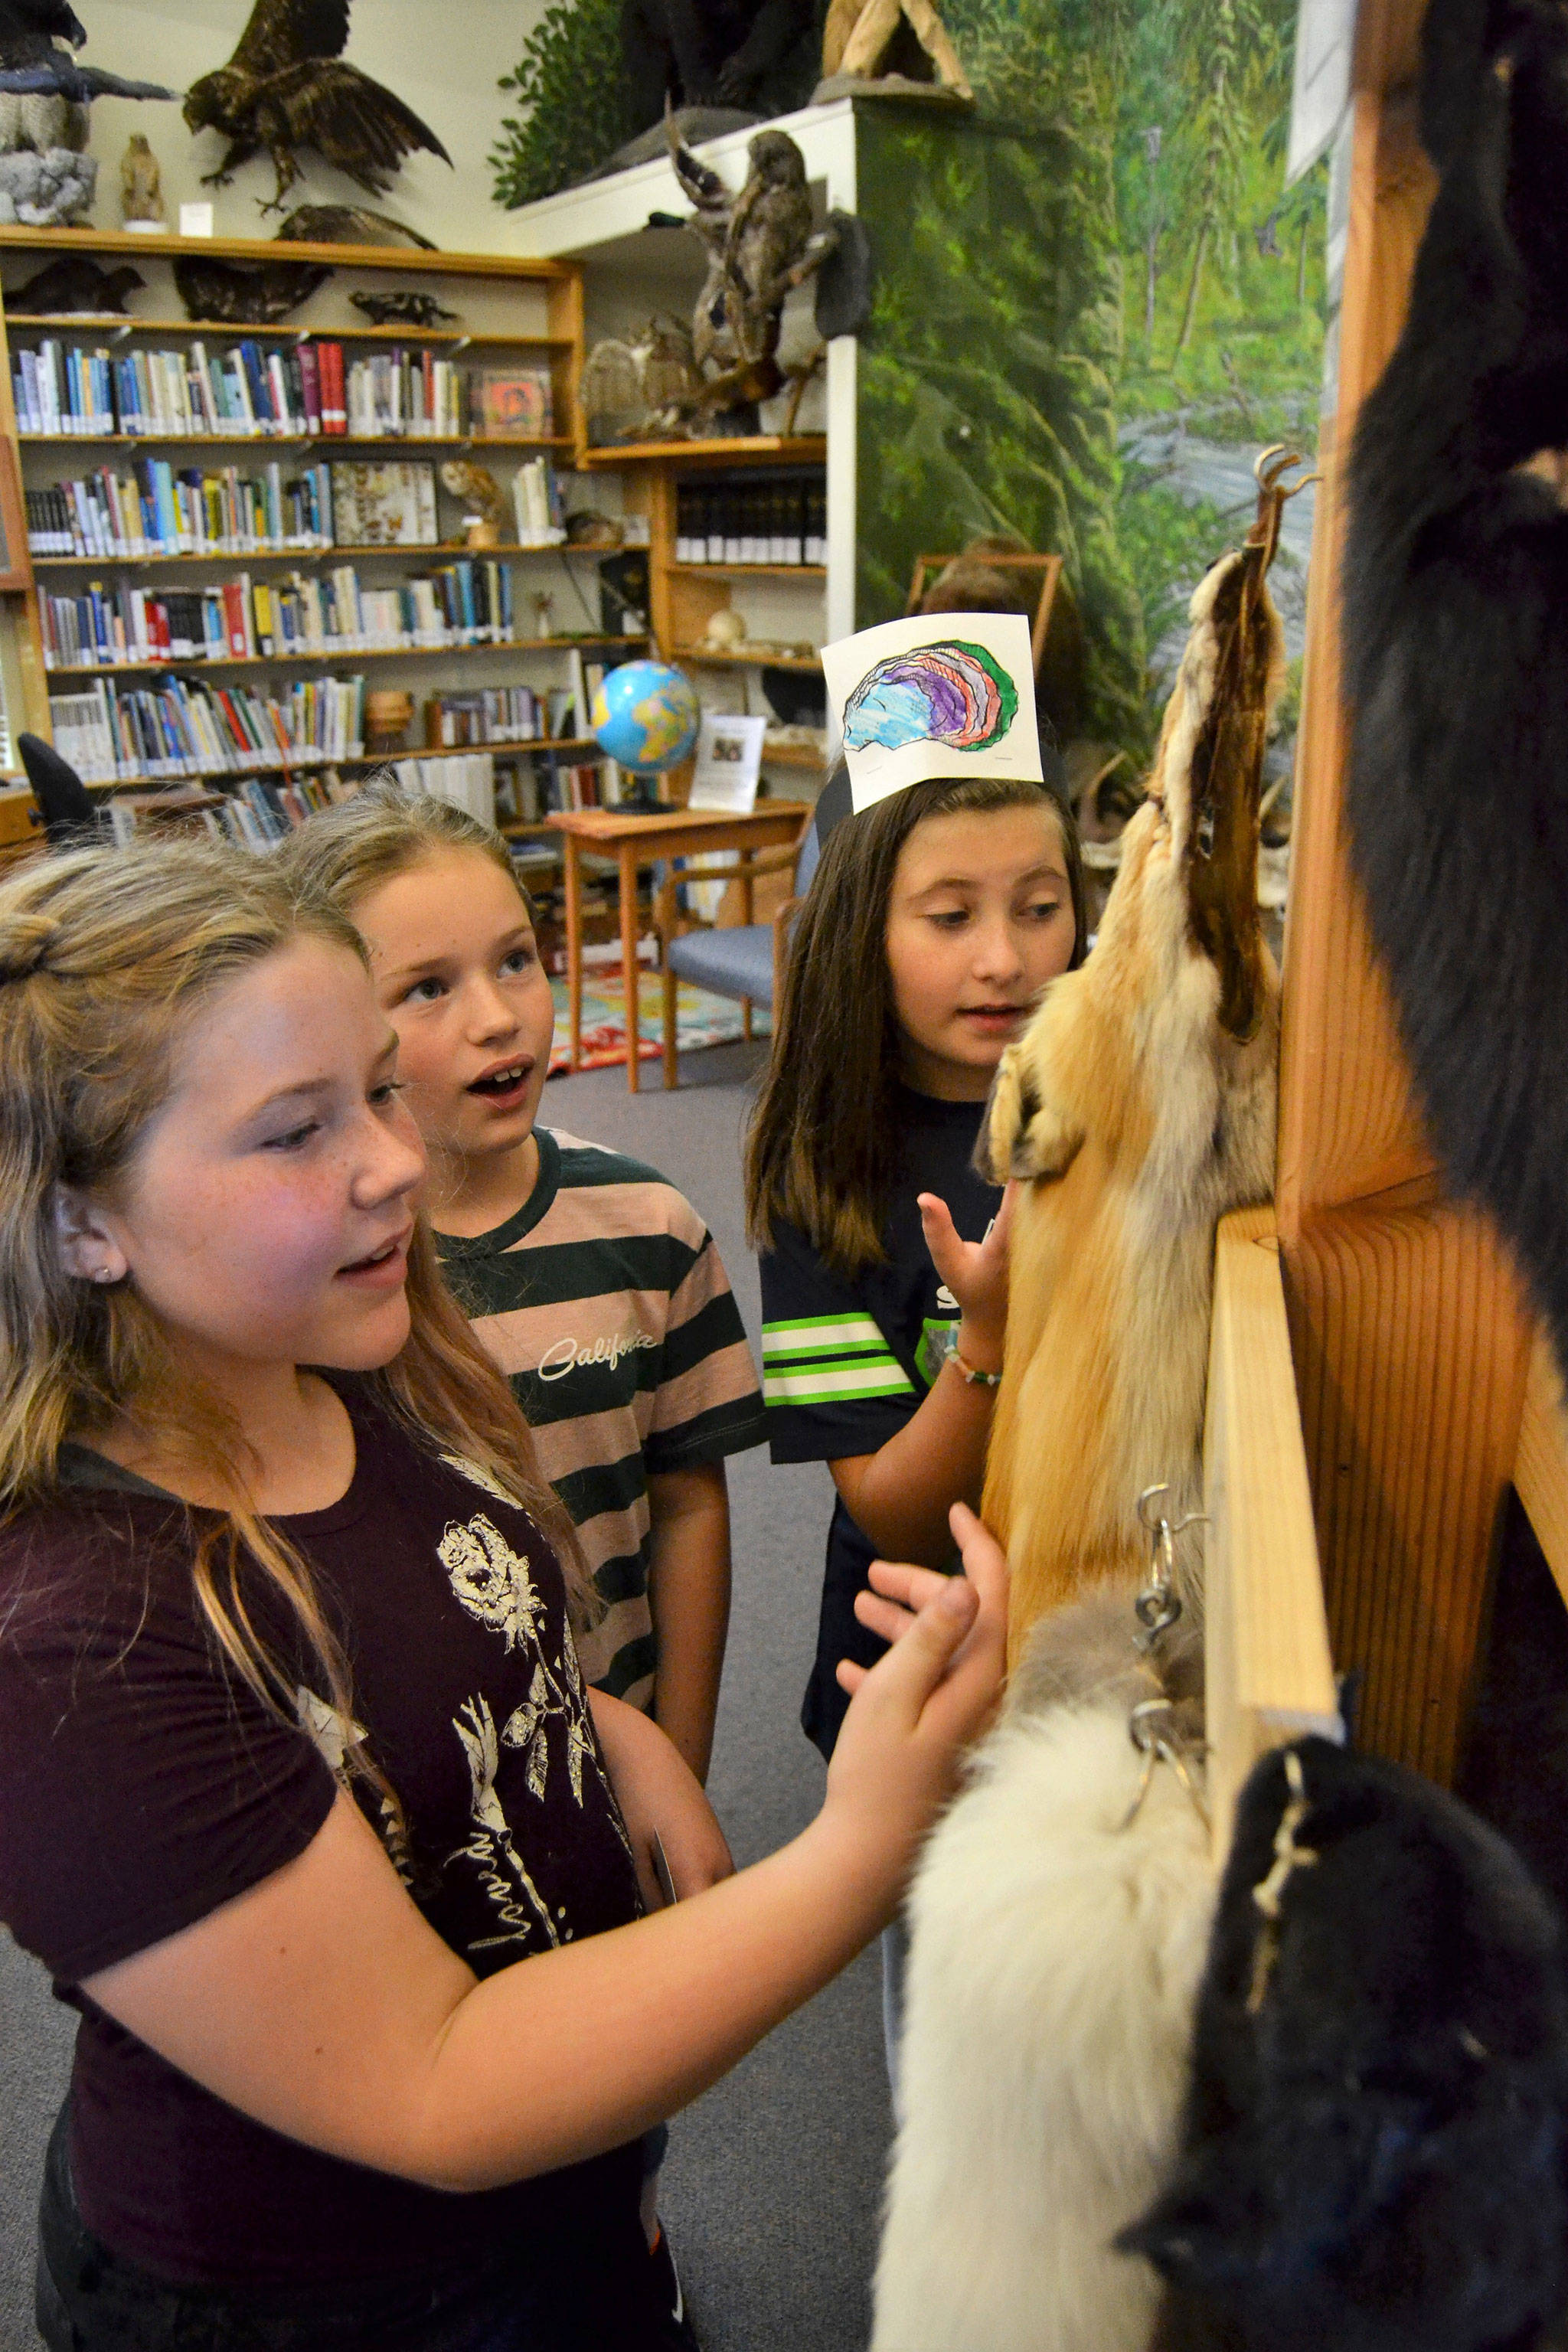 Taylor Hancock, 10, Ava Gastley, 11, and Kendra Dodson, 10, pet animal pelts with the back of their hands inside the Dungeness River Audubon Center during the River Festival. Sequim Gazette photo by Matthew Nash